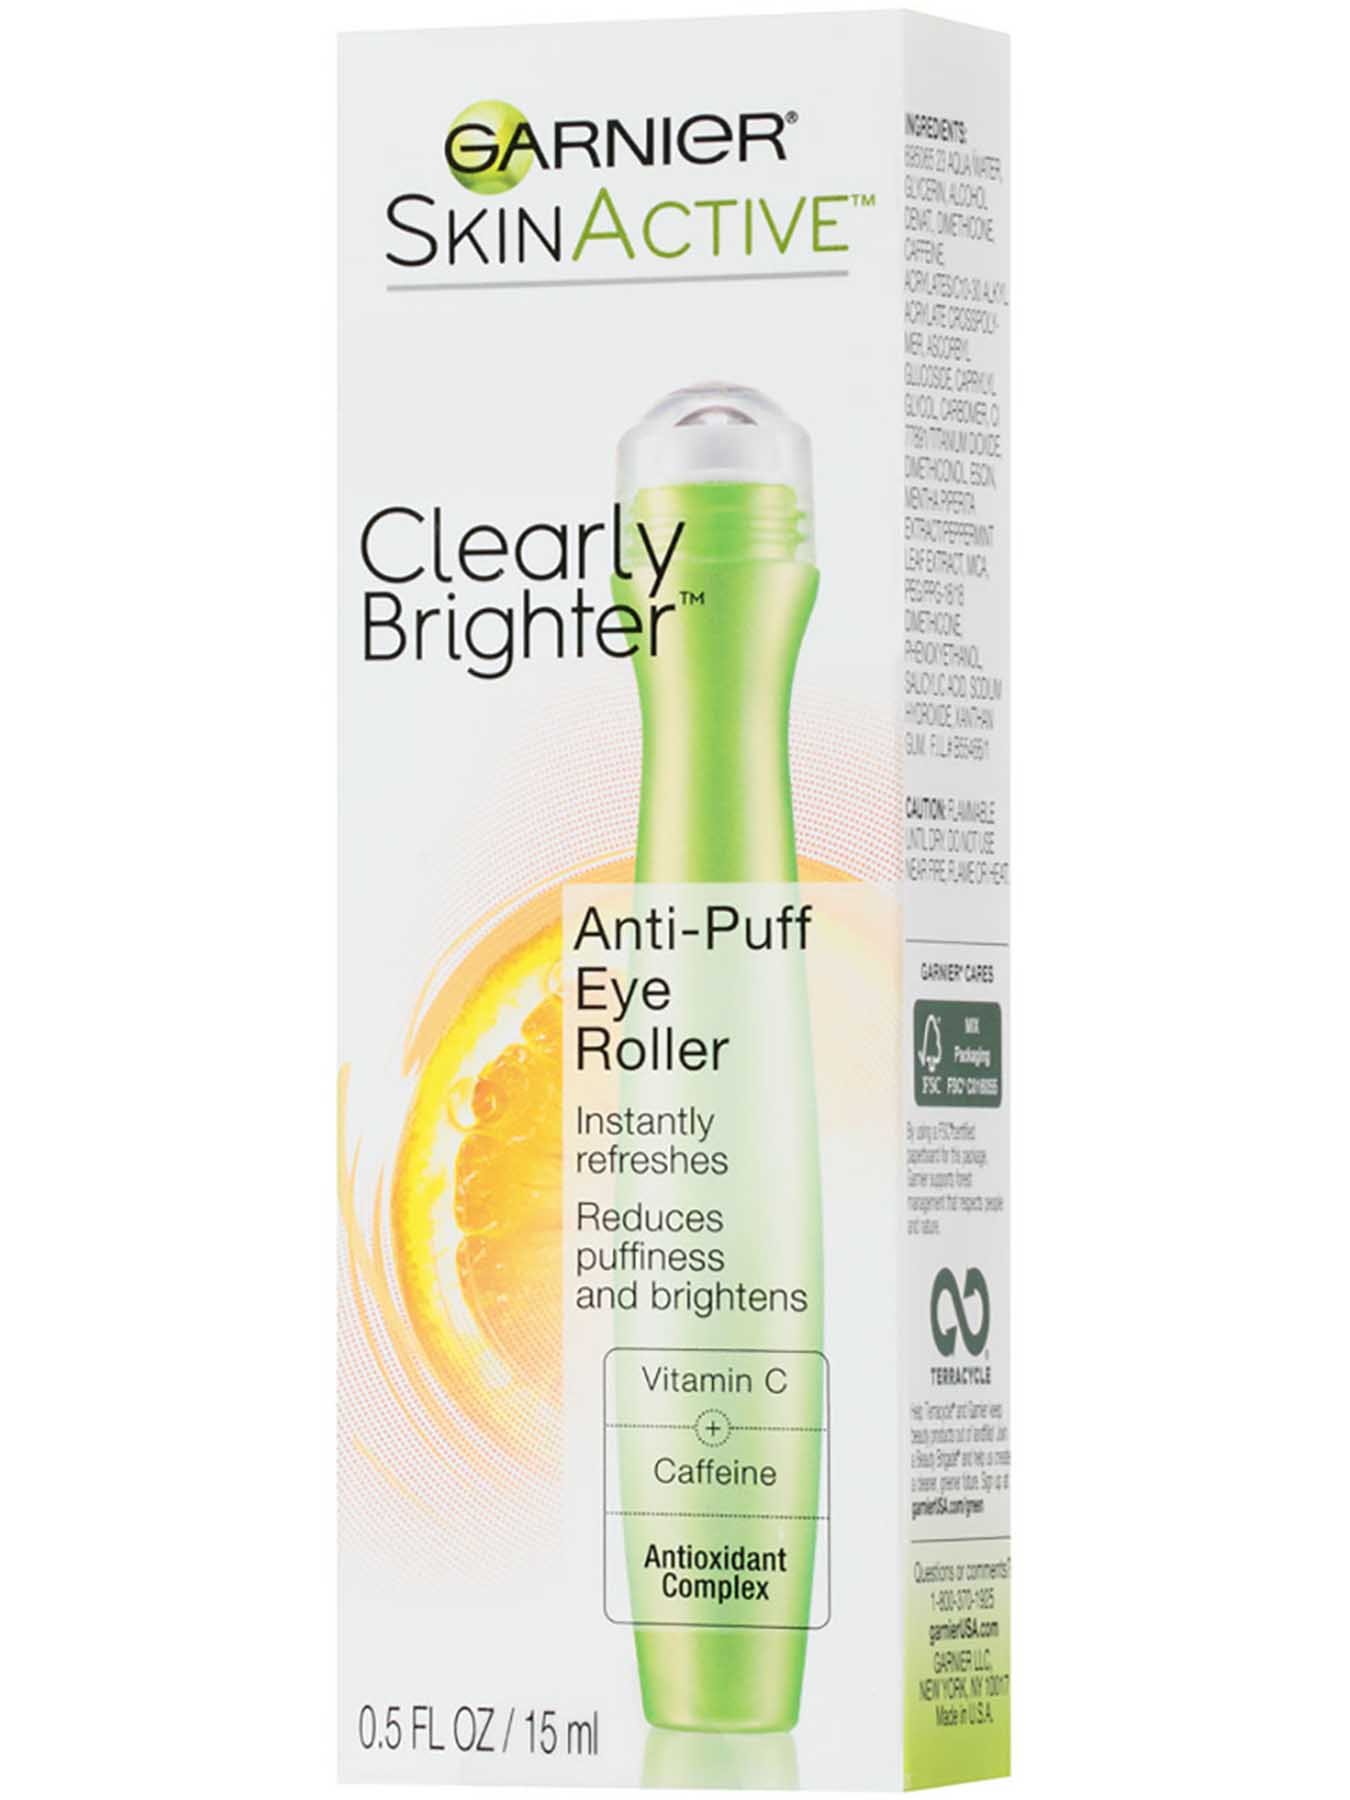 Left Side view of Clearly Brighter Anti-Puff Eye Roller.